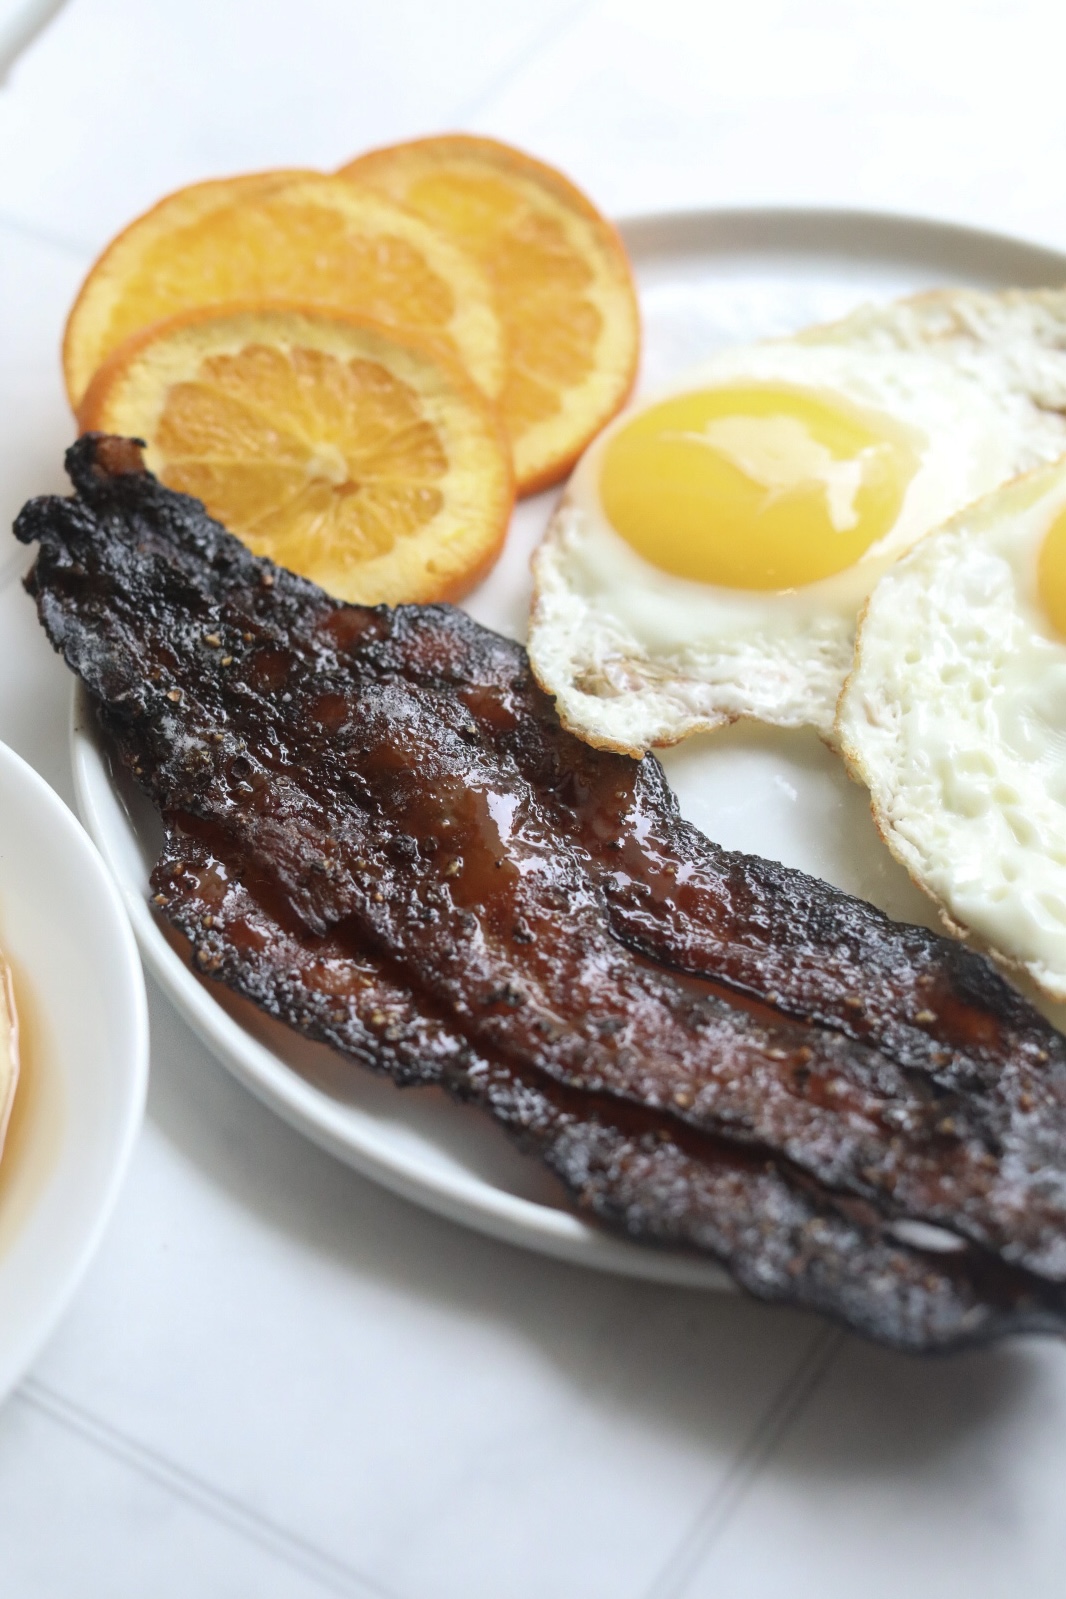 Maple candied bacon on a white plate with fried eggs and sliced oranges.